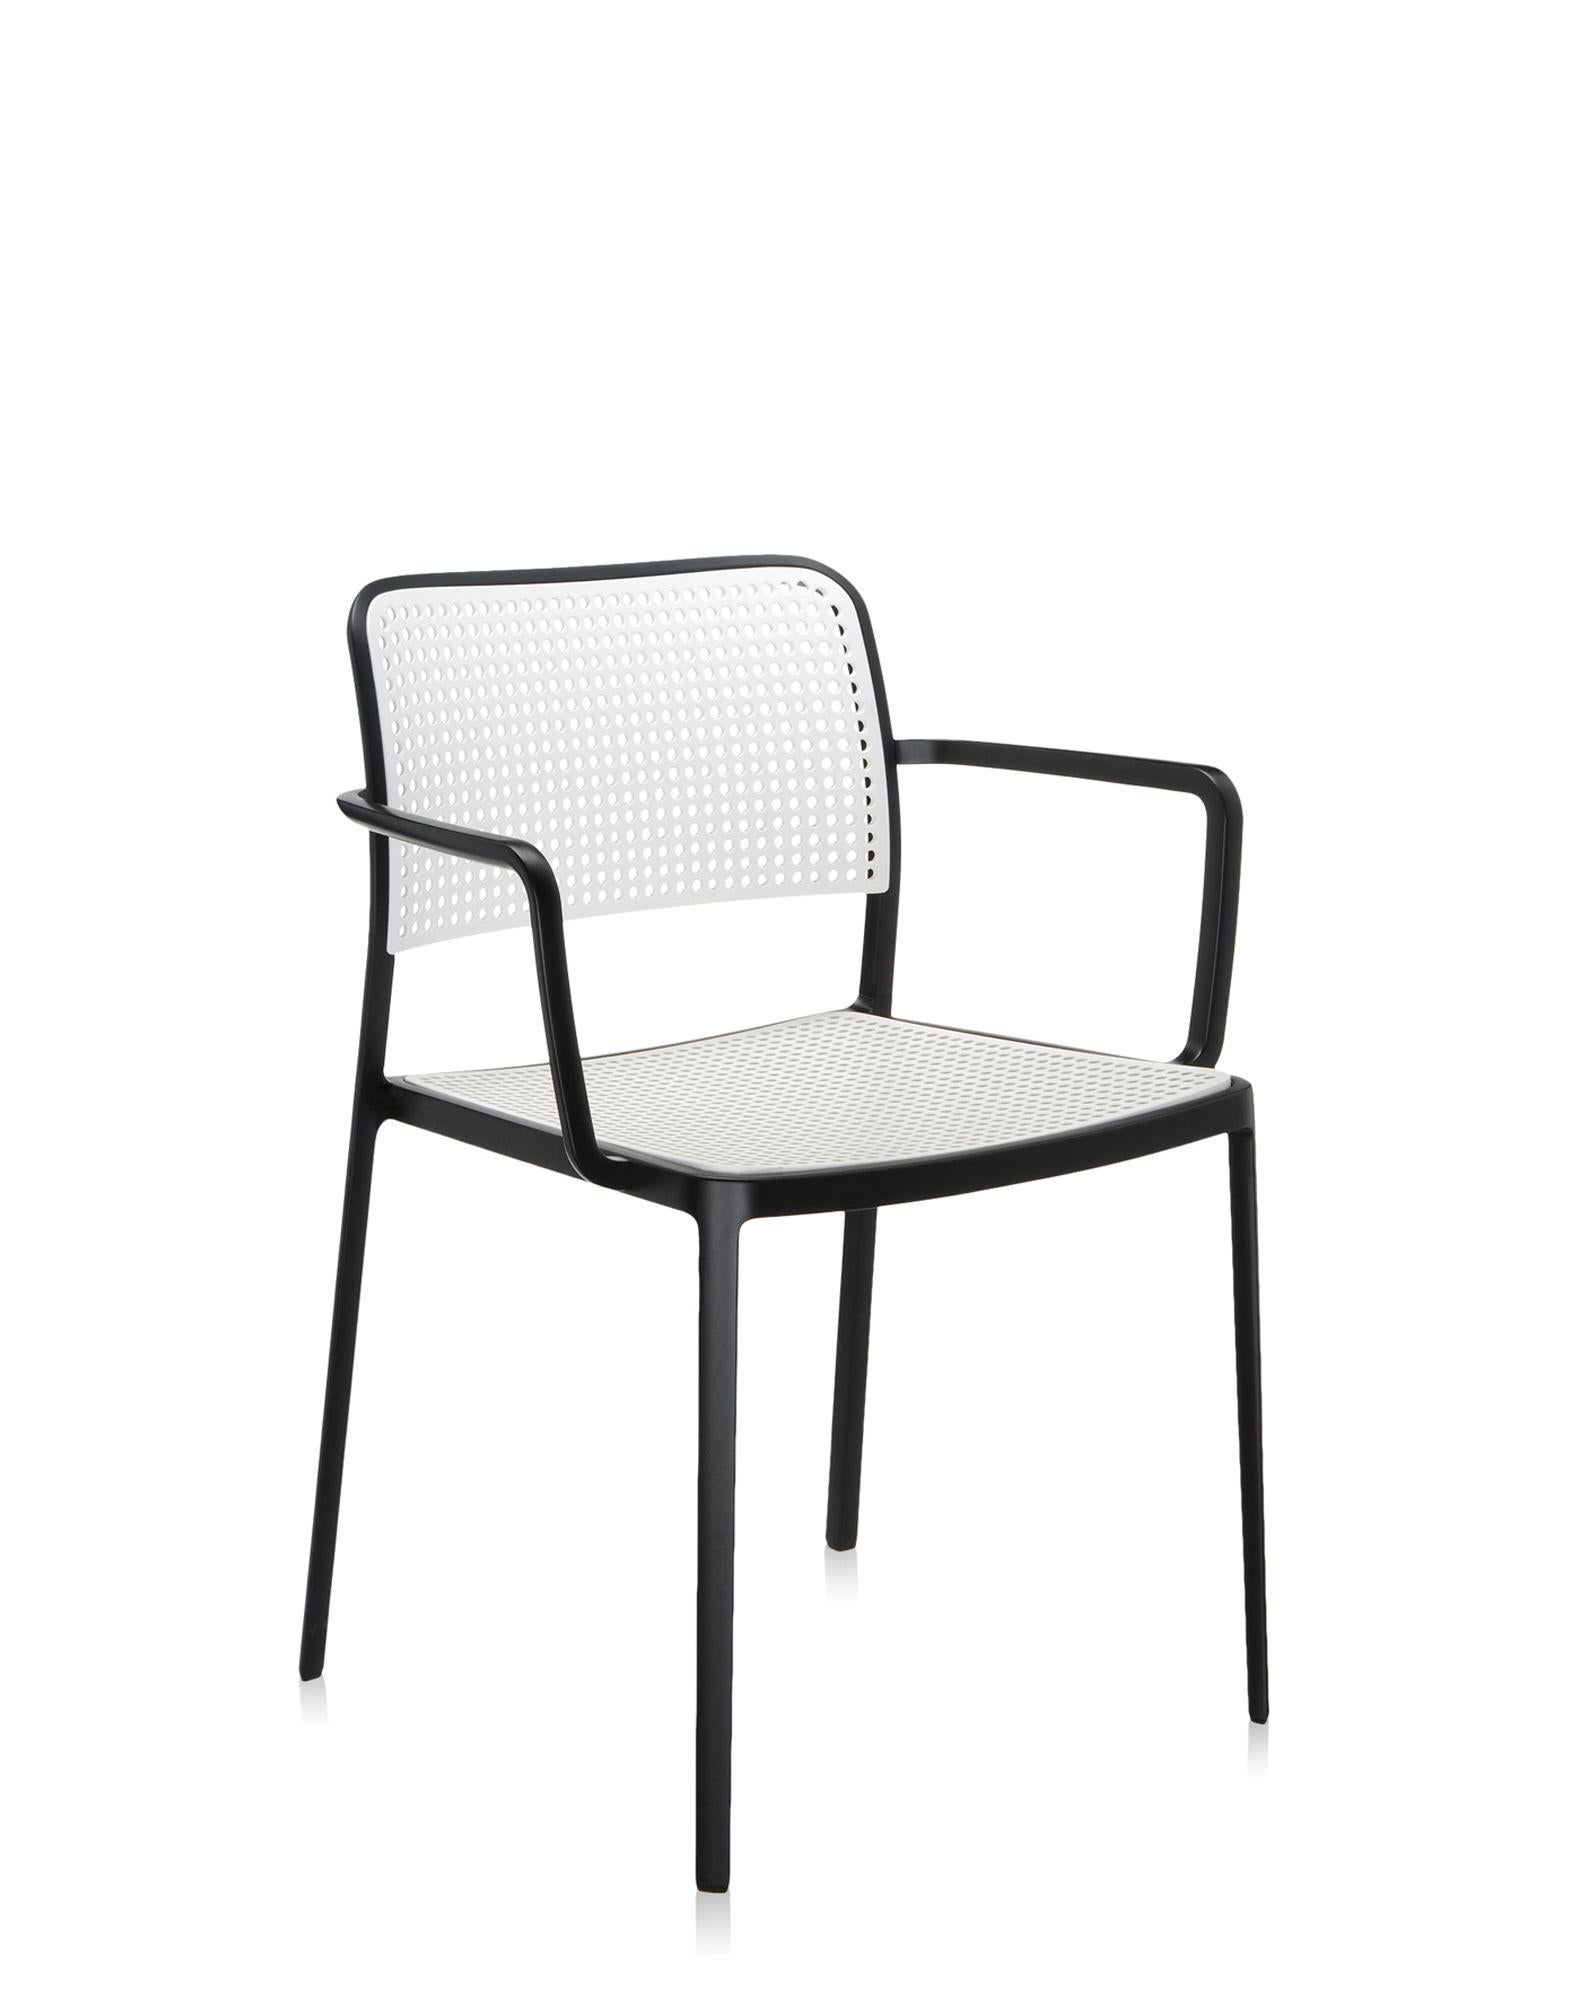 Italian Set of 2 Kartell Audrey Chair by Piero Lissoni in Black & White For Sale